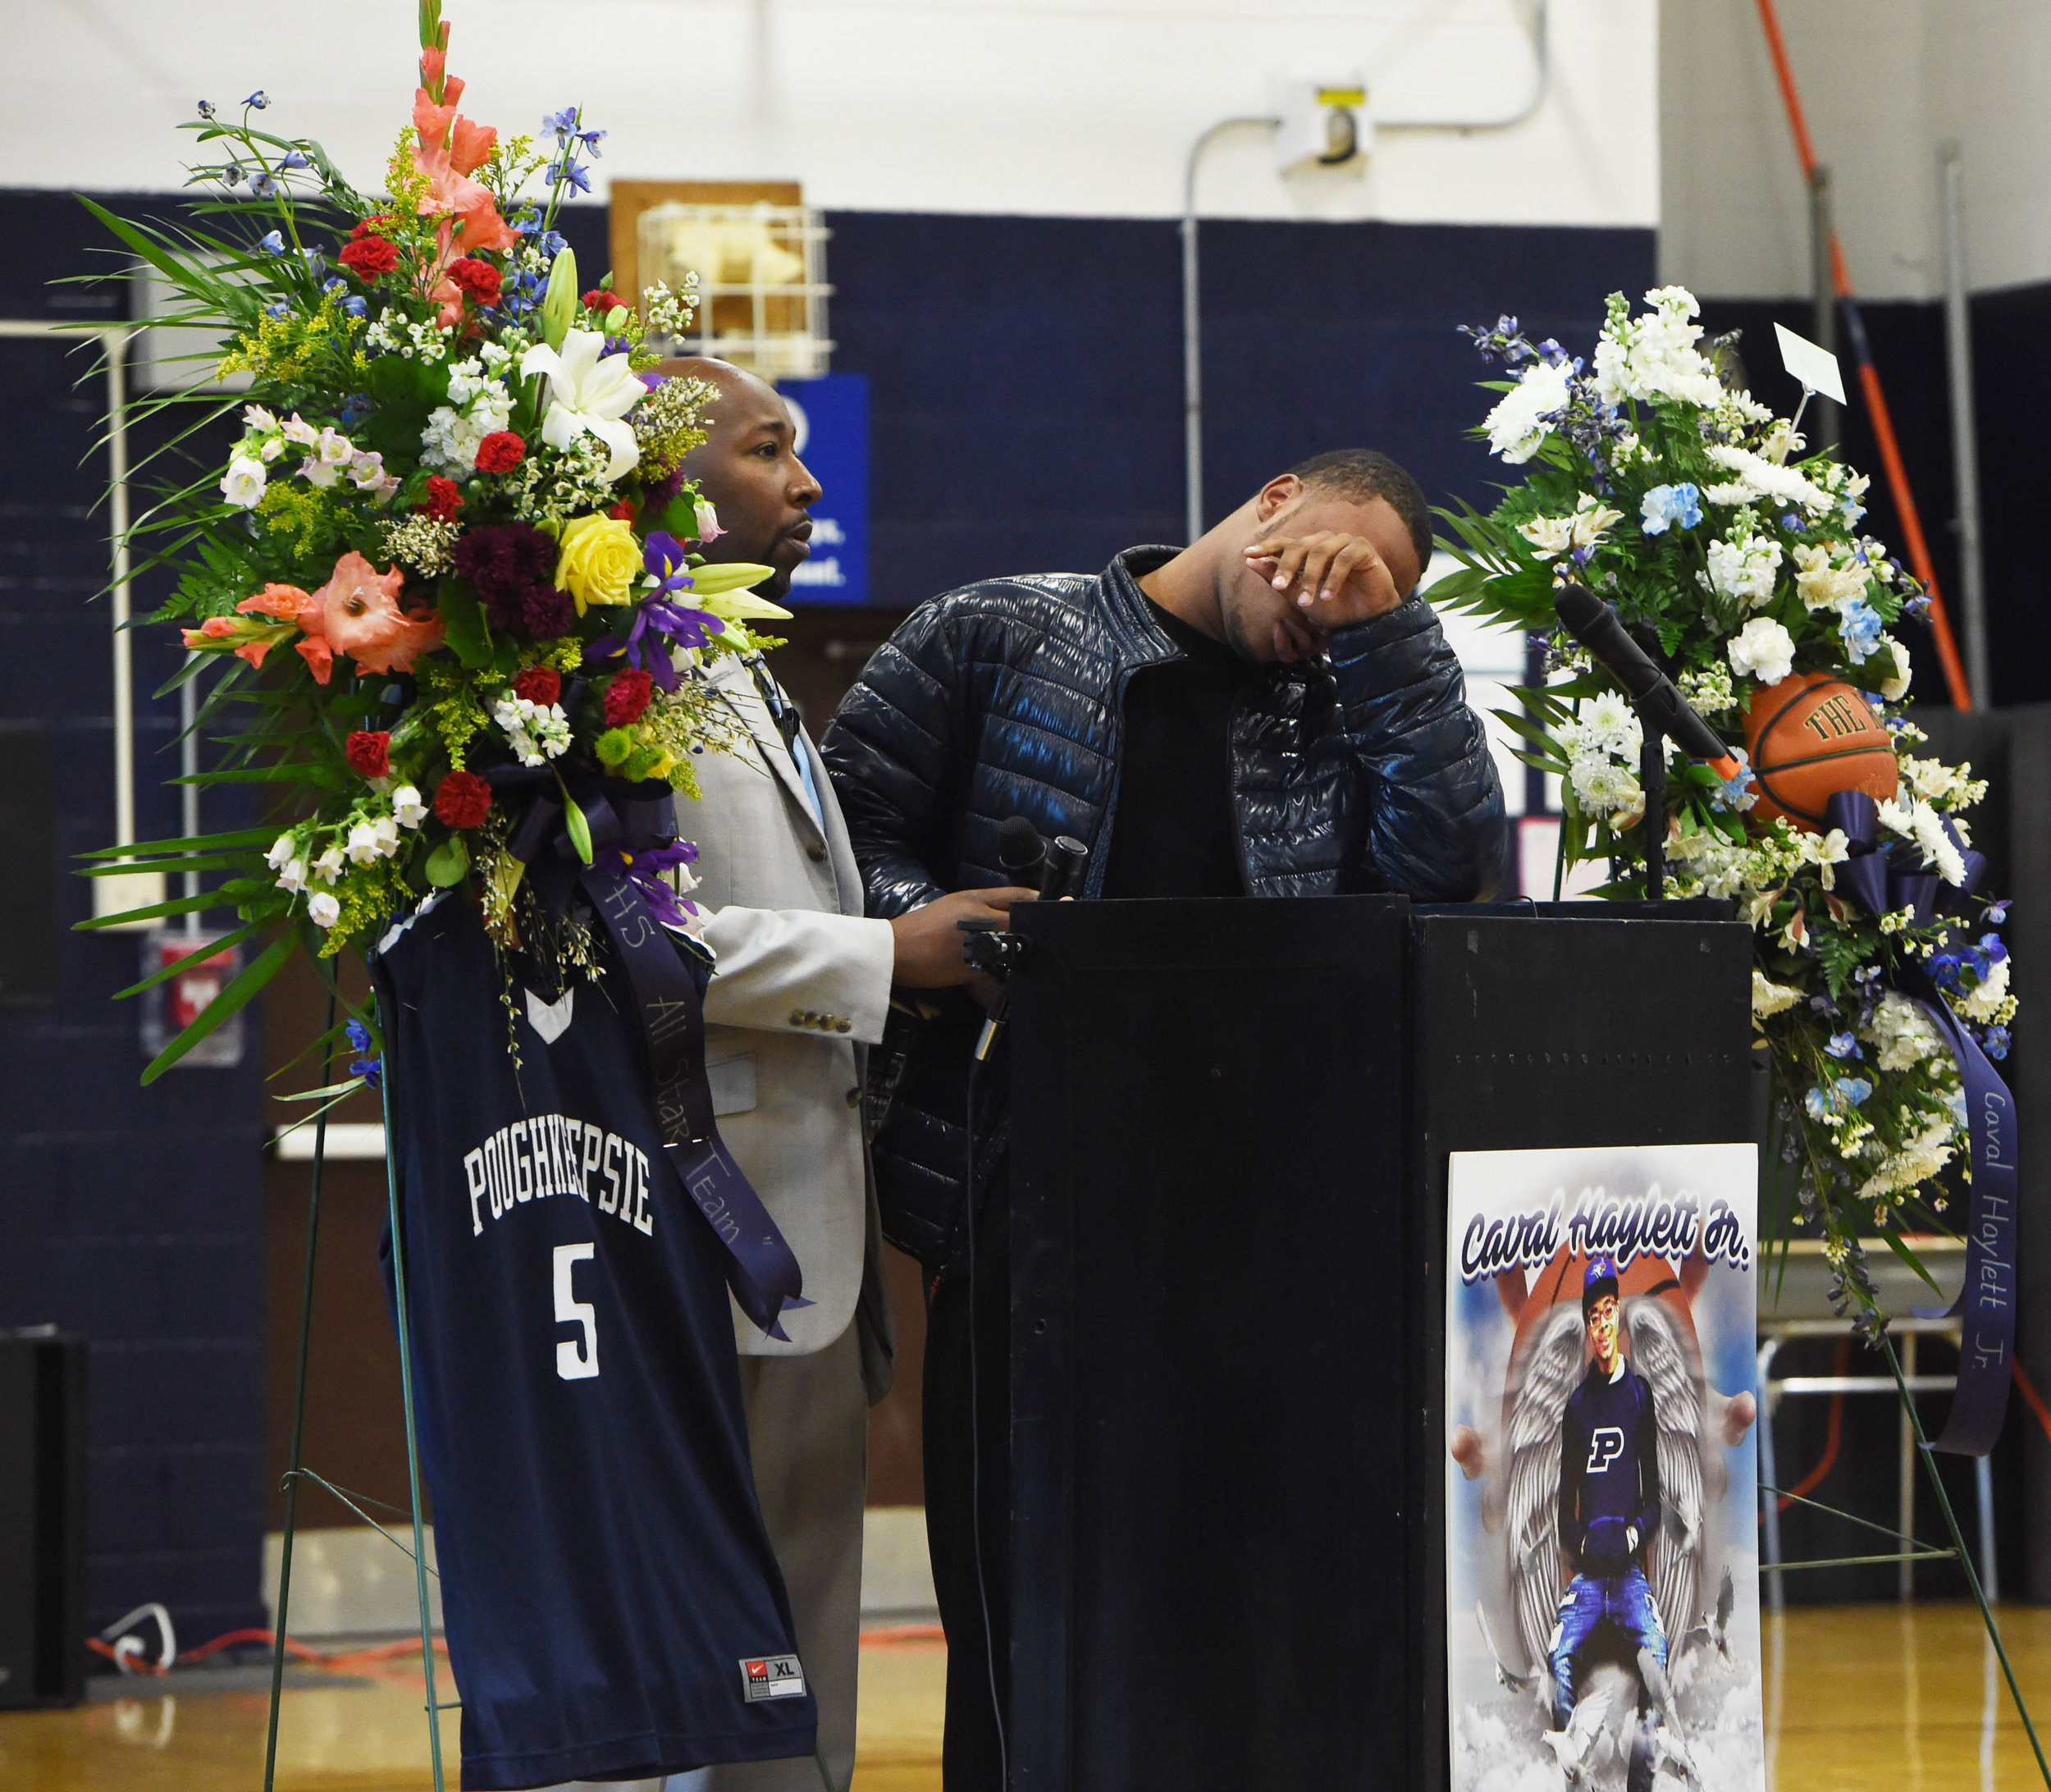  3/14/2016 - Poughkeepsie, NY - Akili Hill, 17, right, a student at Poughkeepsie High School and a member of the school's boys varsity basketball team, is overcome with emotion during the memorial for former teammate Caval Haylett Jr., who was shot o